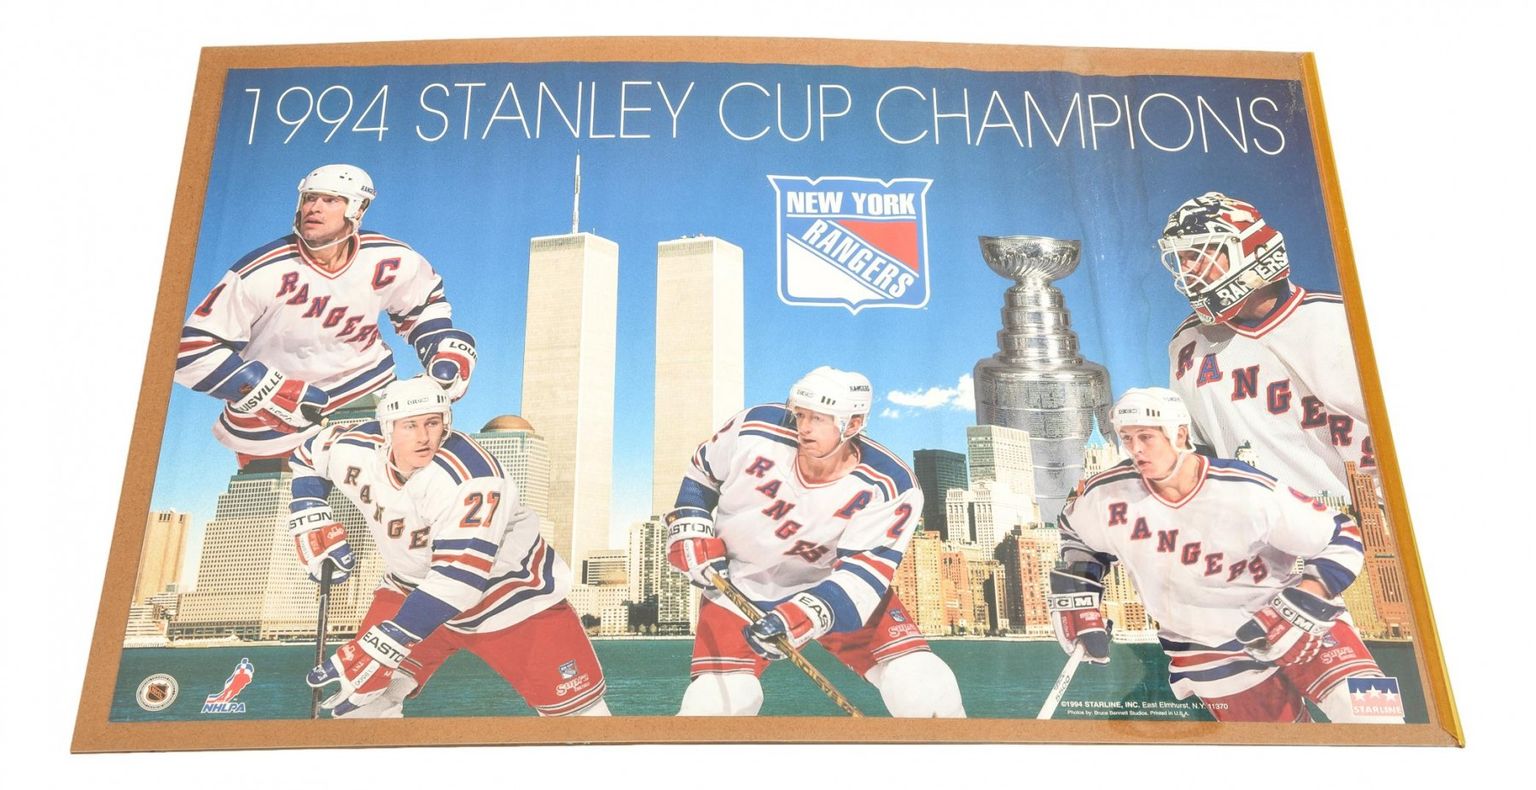 Hitiques — 1994 Stanley Cup Champions New York Rangers Poster 